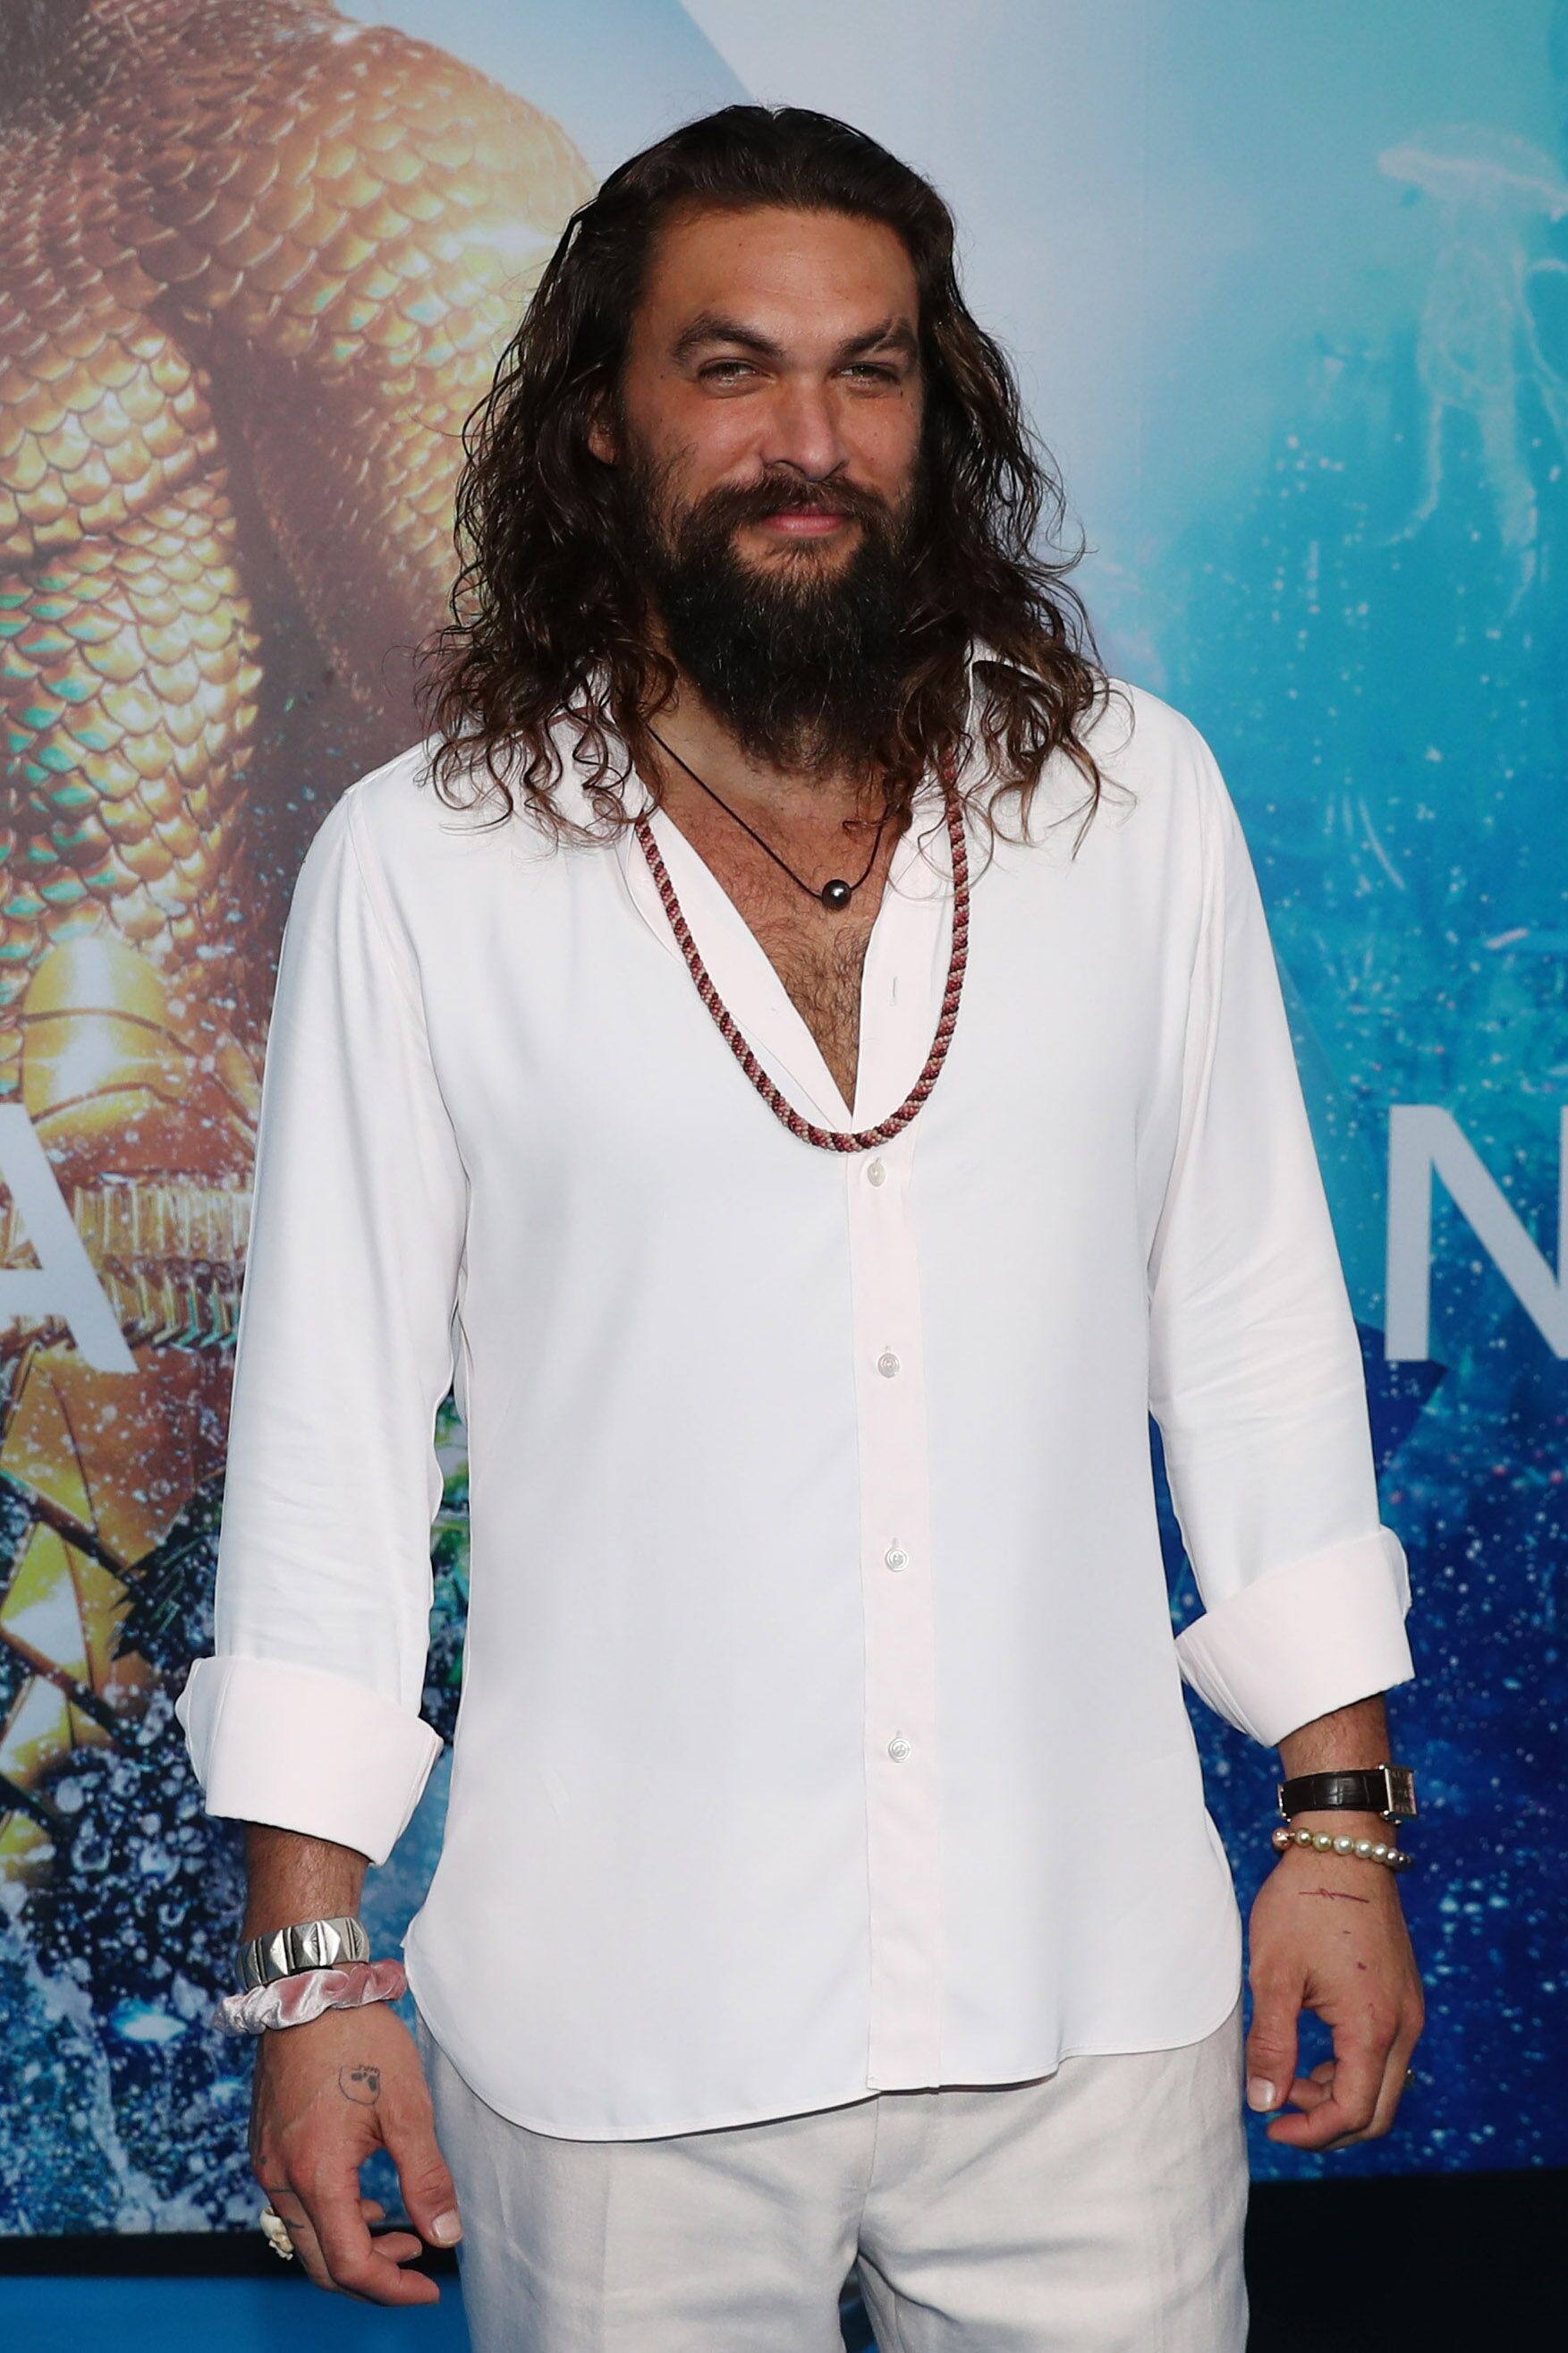 Jason Momoa poses at the Australian premiere of Aquaman | Getty Images